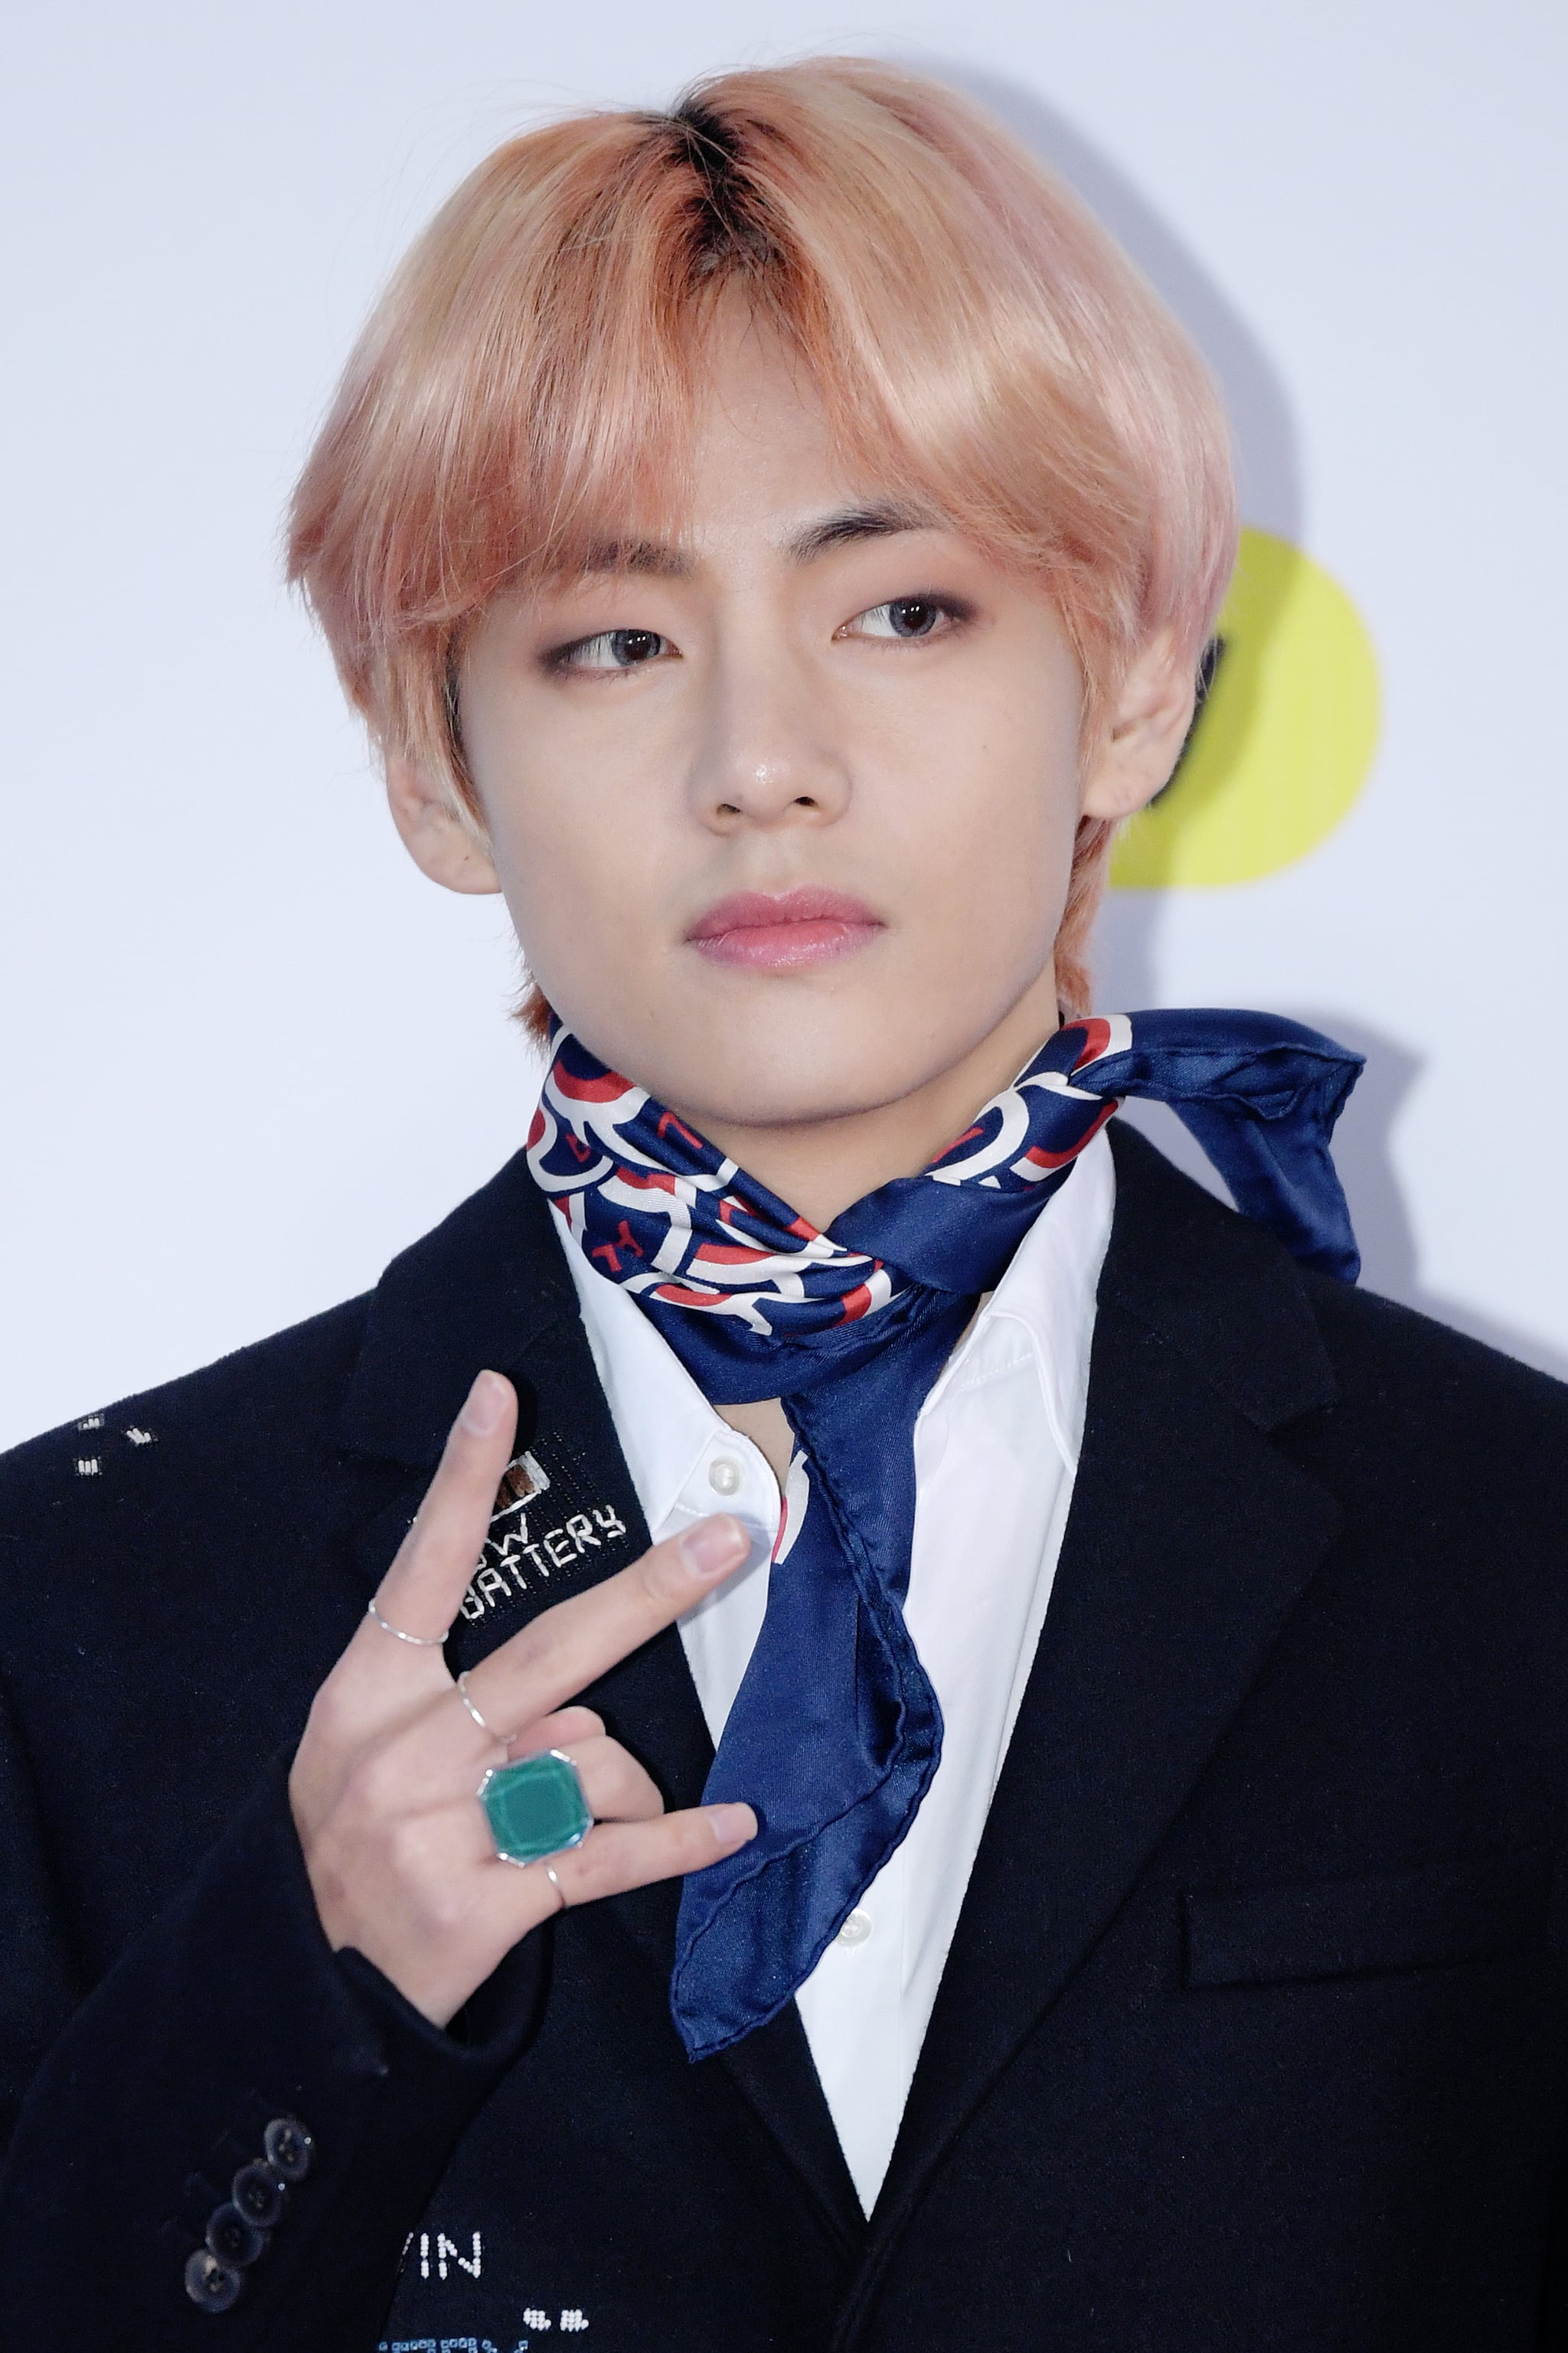  V of BTS attends the 2018 SBS Gayo Daejeon 'Battle of the Bands' at Gocheok Sky Dome on December 25, 2018 in Seoul, South Korea. (Photo by THE FACT/Imazins via Getty Images)